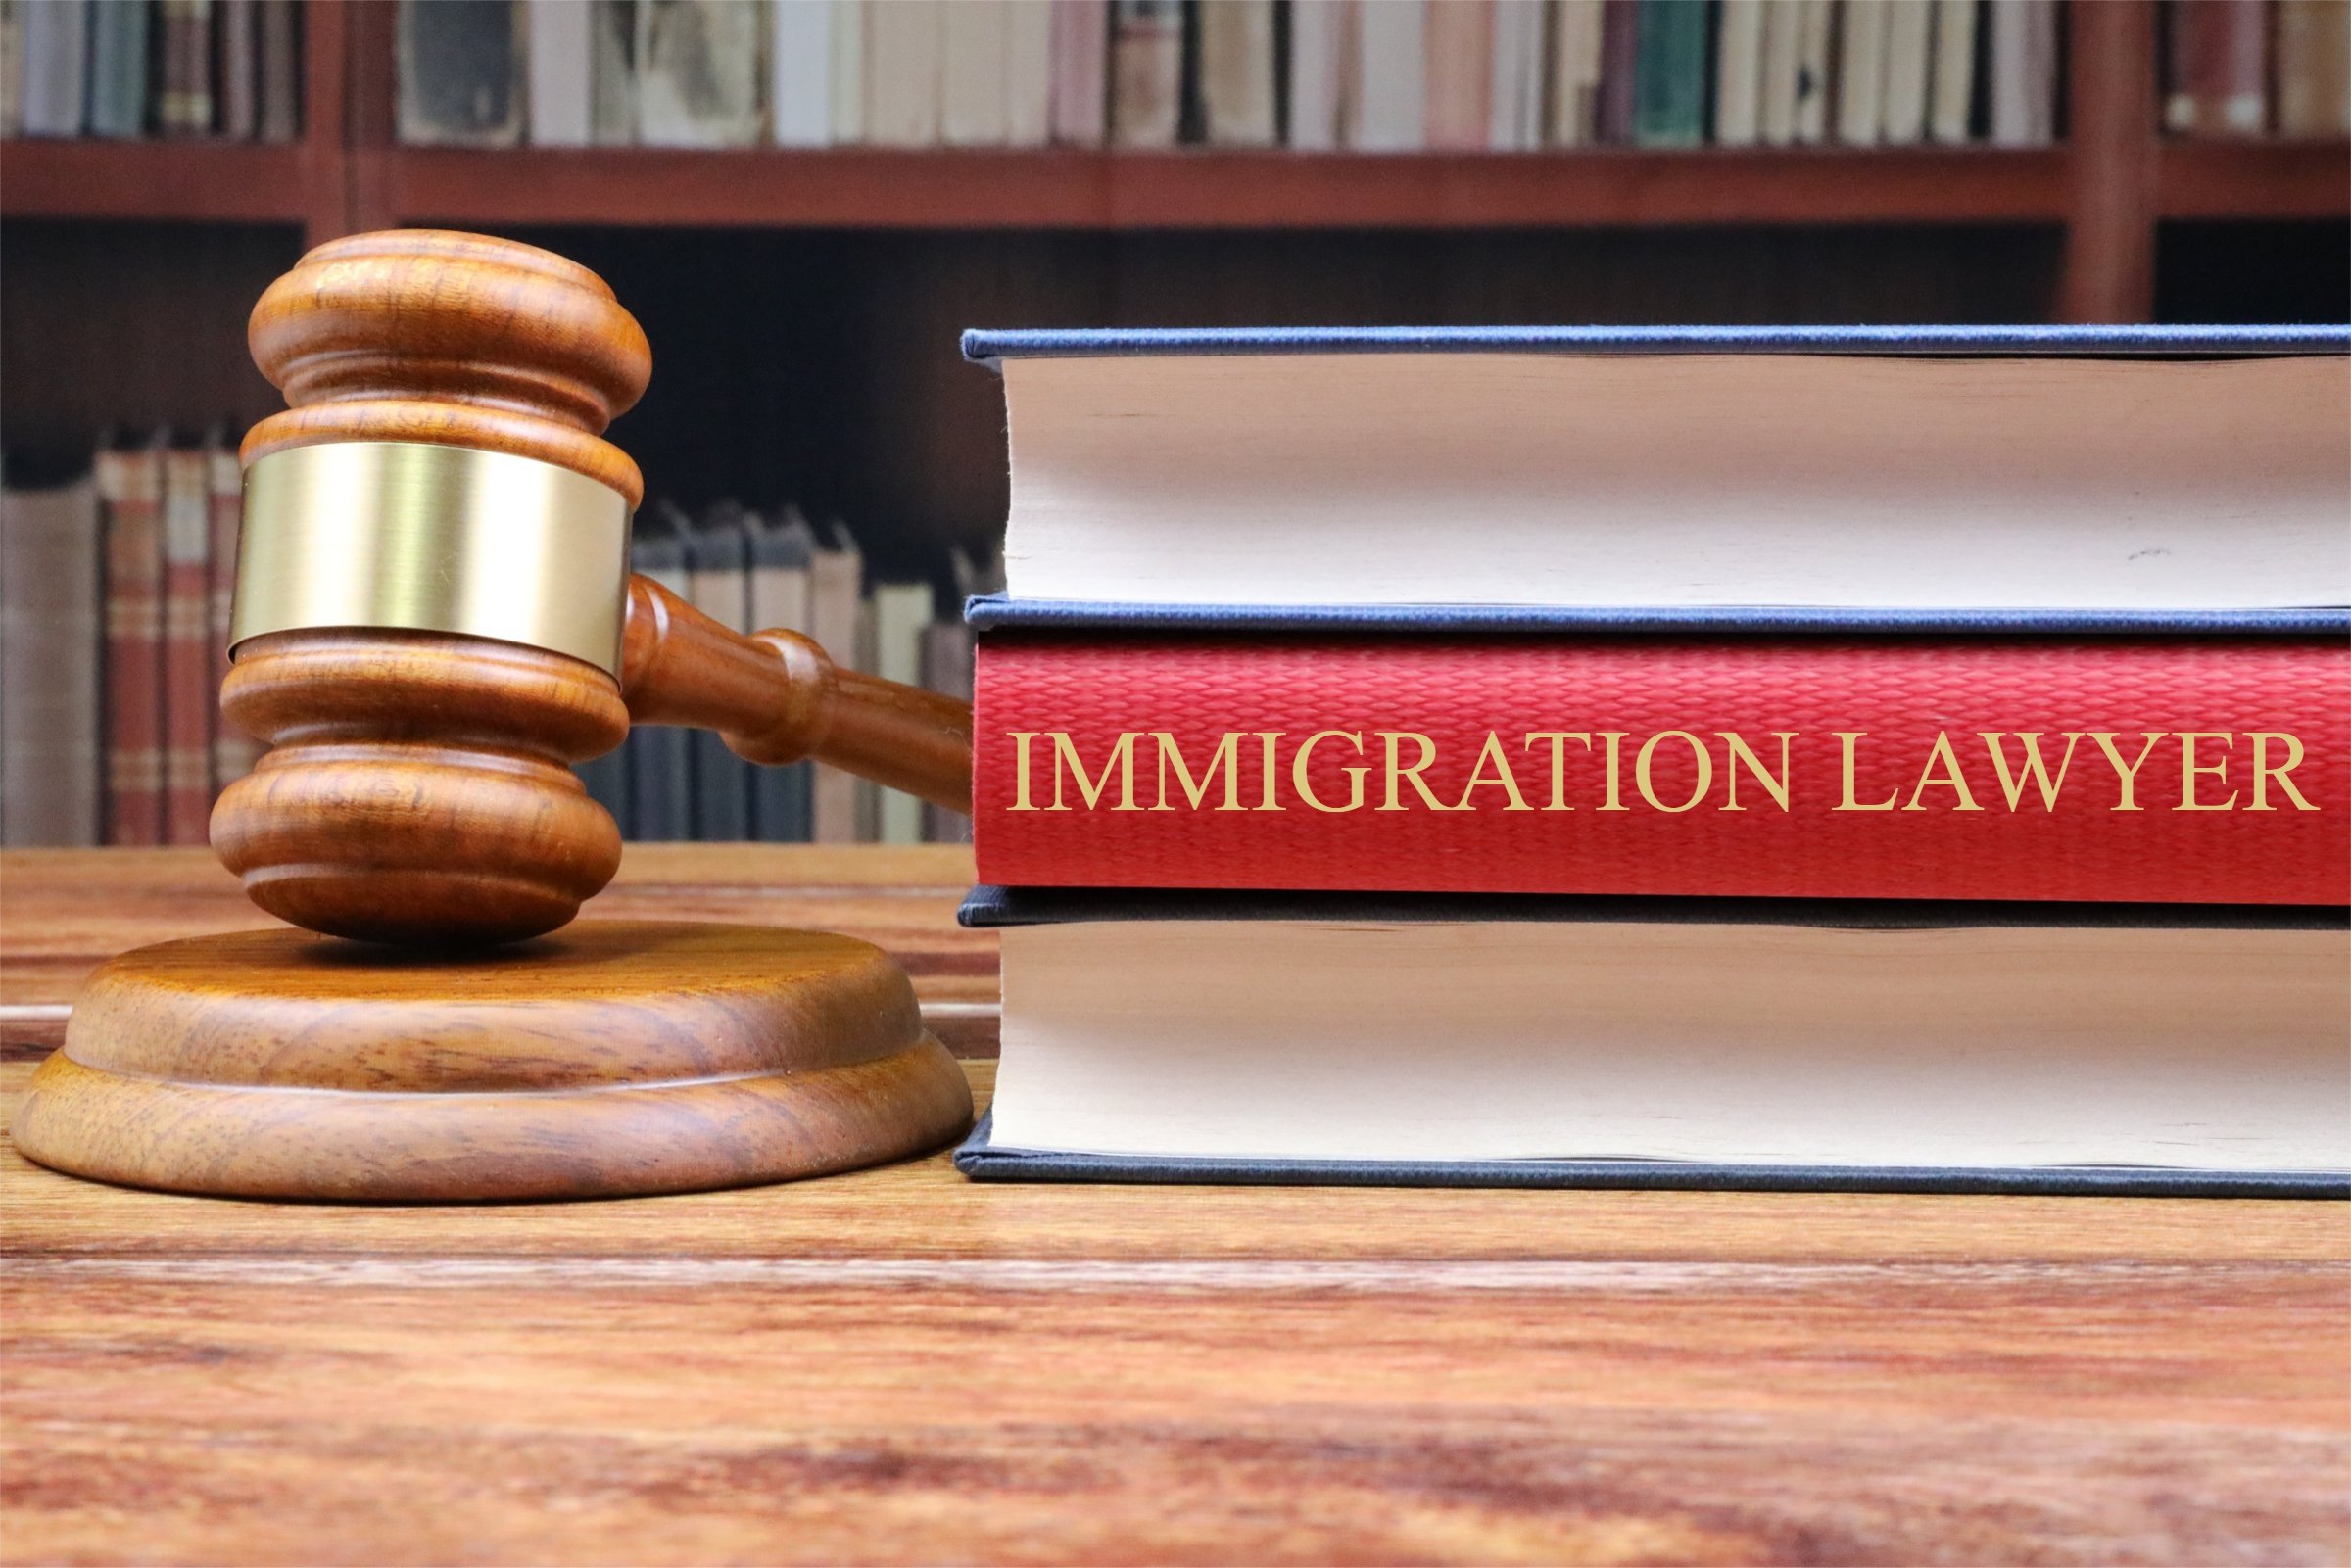 Immigration Lawyer - Free of Charge Creative Commons Legal 8 image